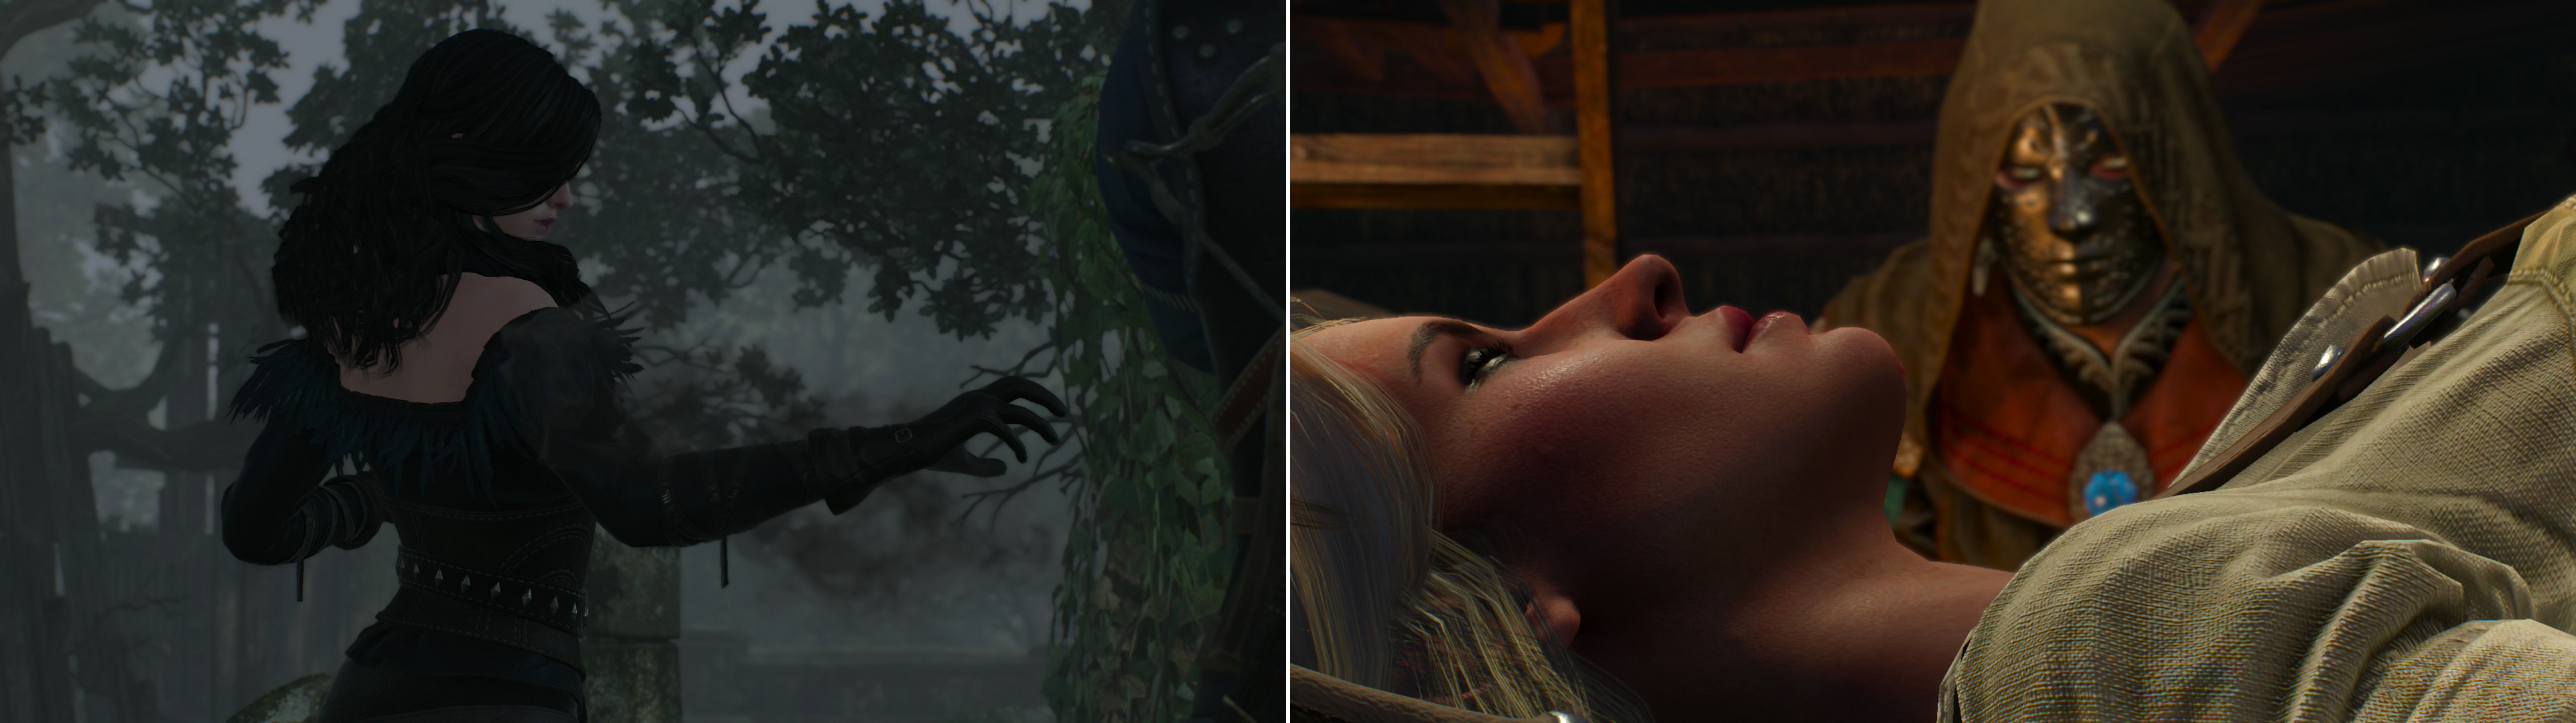 Yennefer will perform dark magic (left) to coax a tale about Ciri’s travels in Skellige out of Craven’s corpse (right).